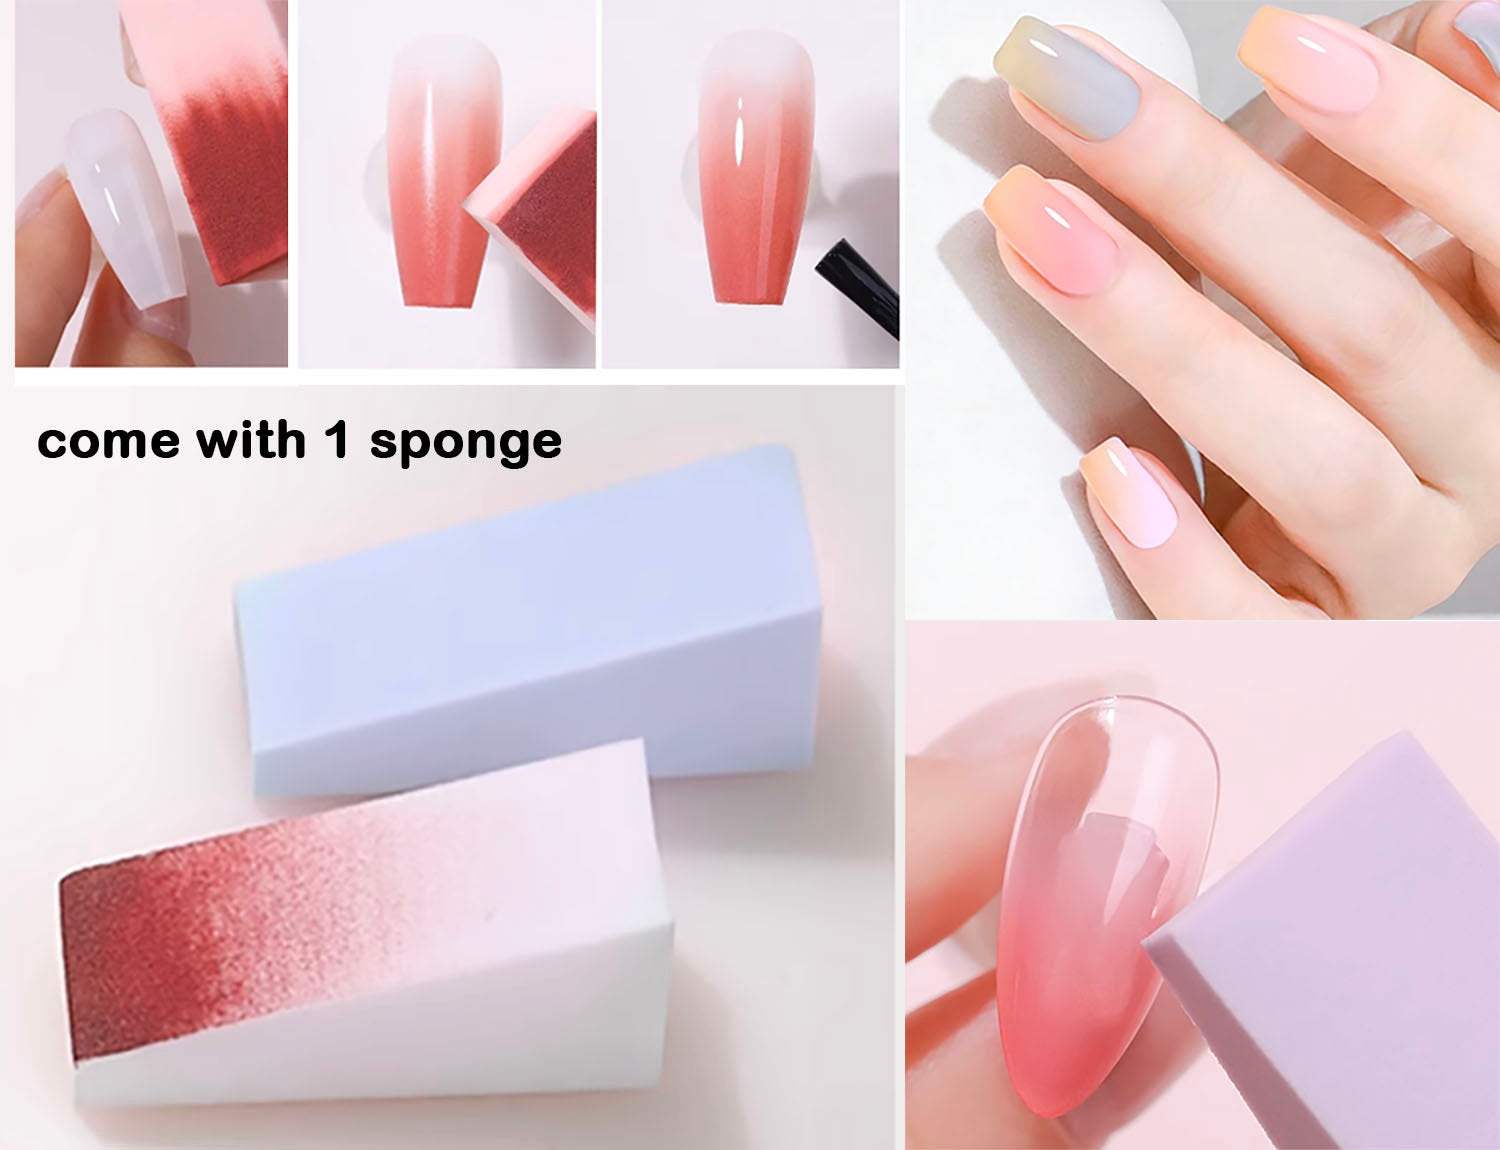 5ml Gradient Painting Nail Gel Polish/ Ombre Strong Coverage Creamy Gels for Nails/ Beginner Friendly Easy to Use